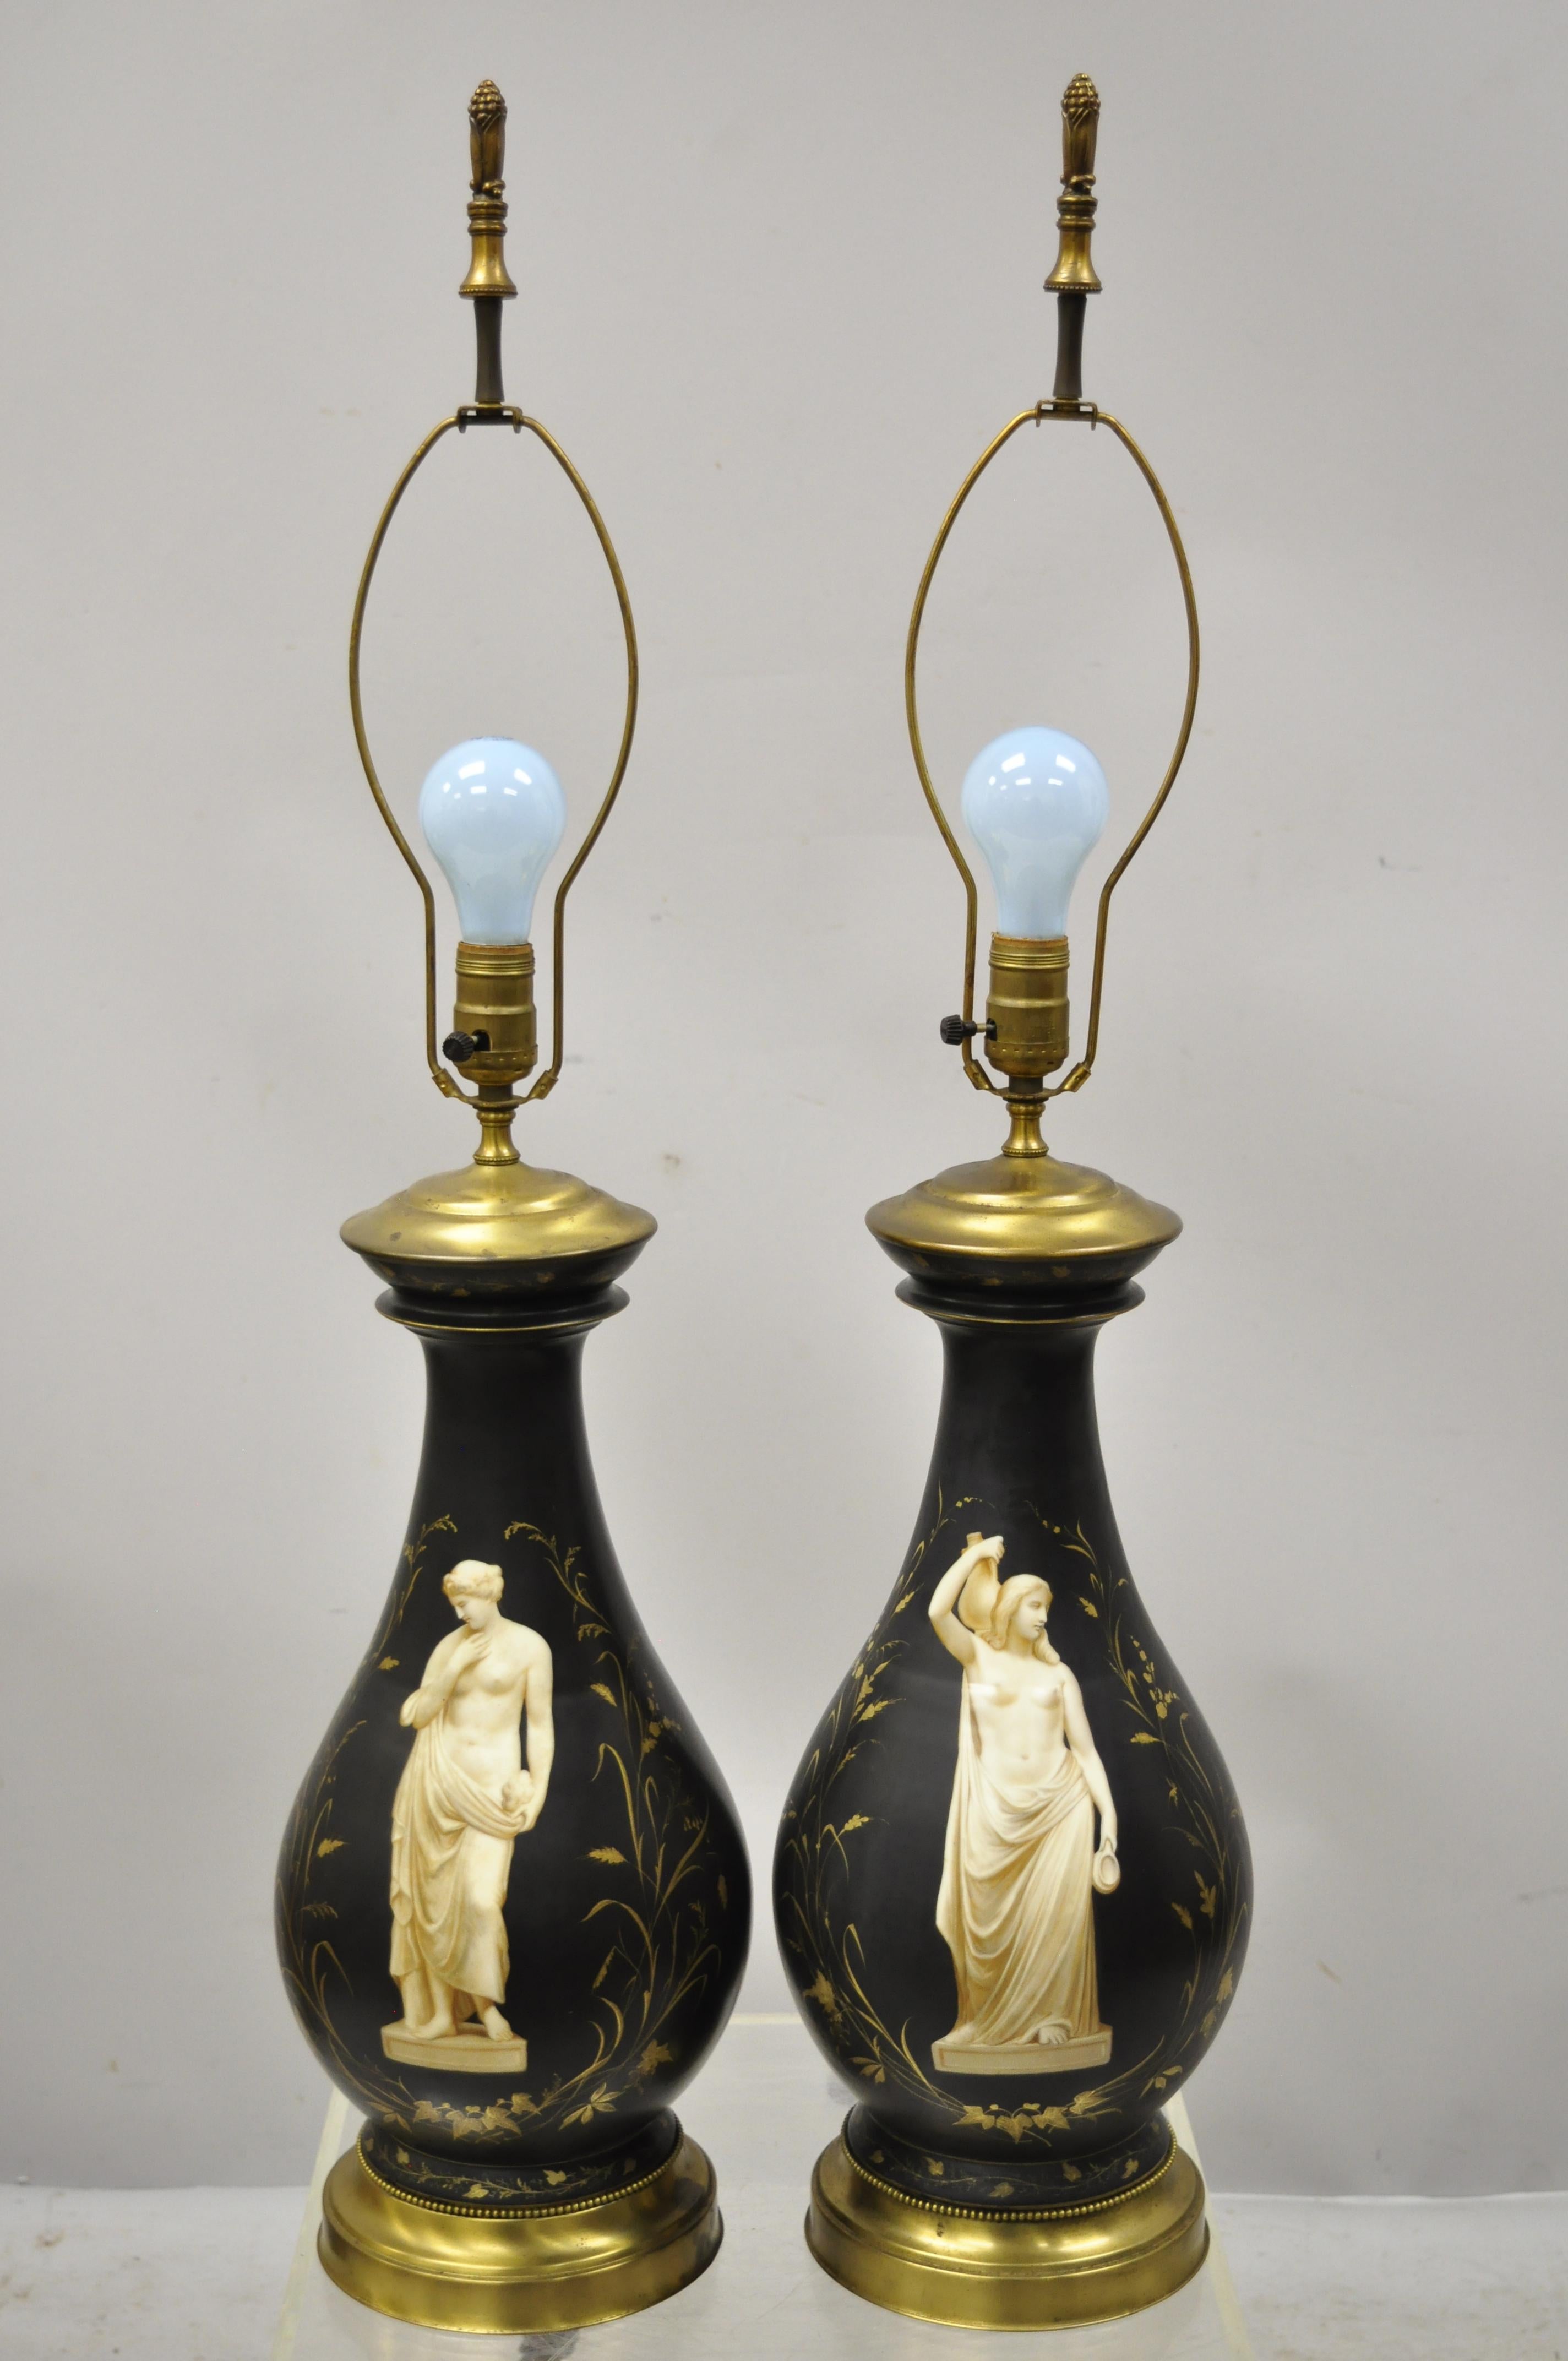 Antique French Neoclassical Black Porcelain Classical Bulbous Table Lamps, Pair For Sale 6